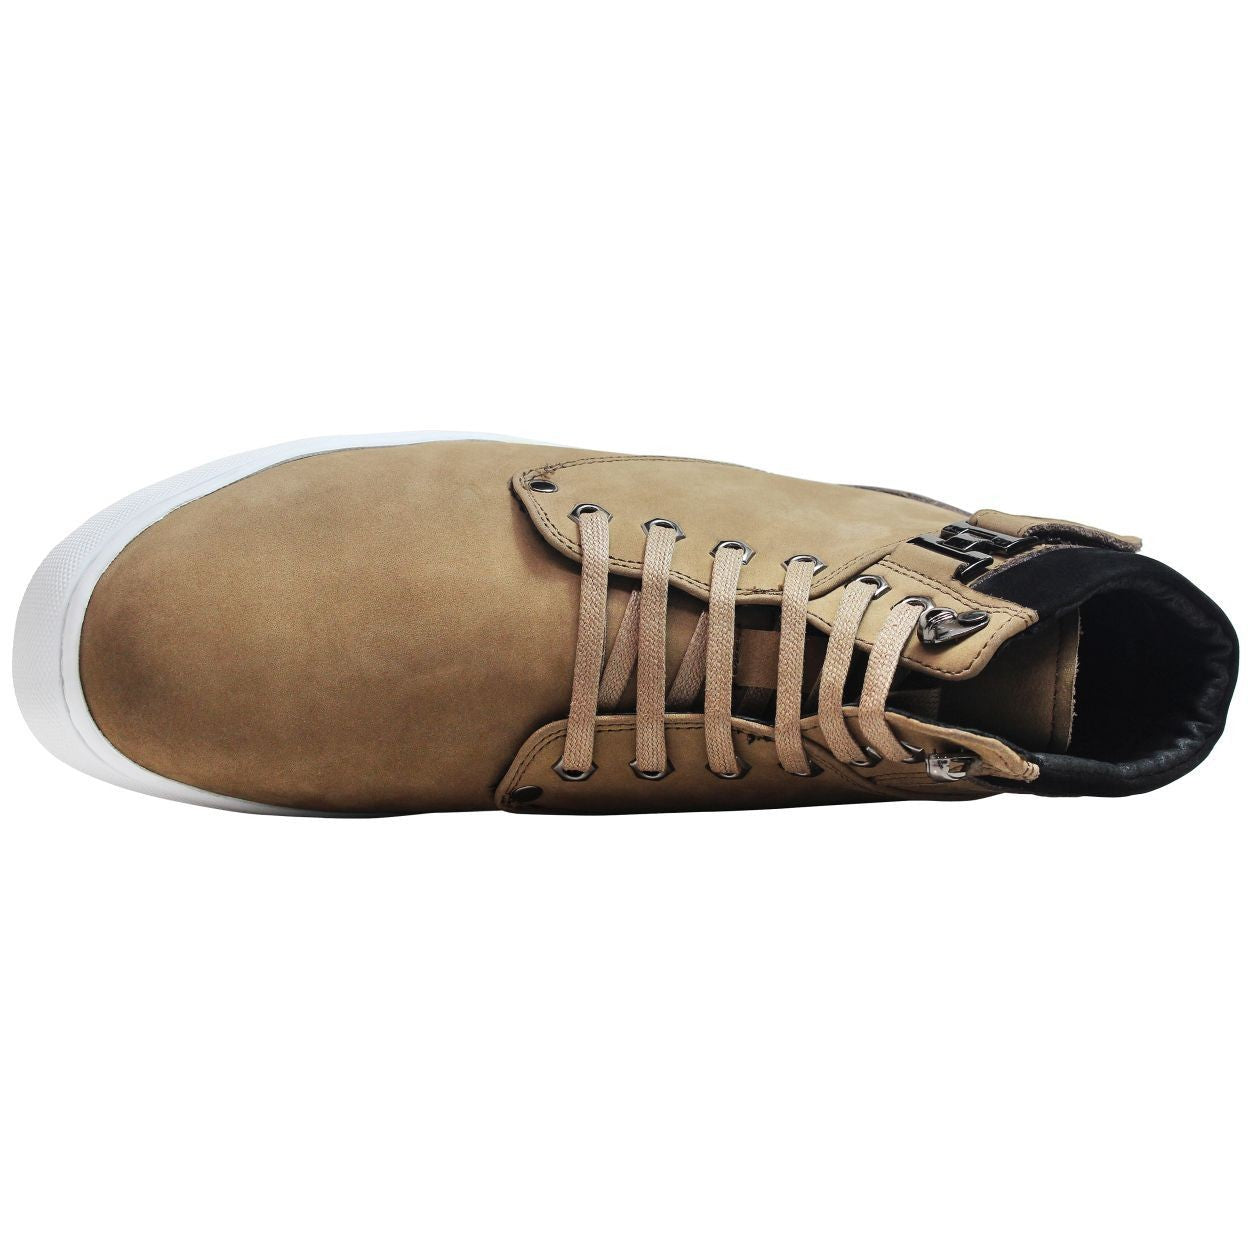 Elevator shoes height increase CALTO - T53121 - 2.6 Inches Taller (Nubuck Tan)